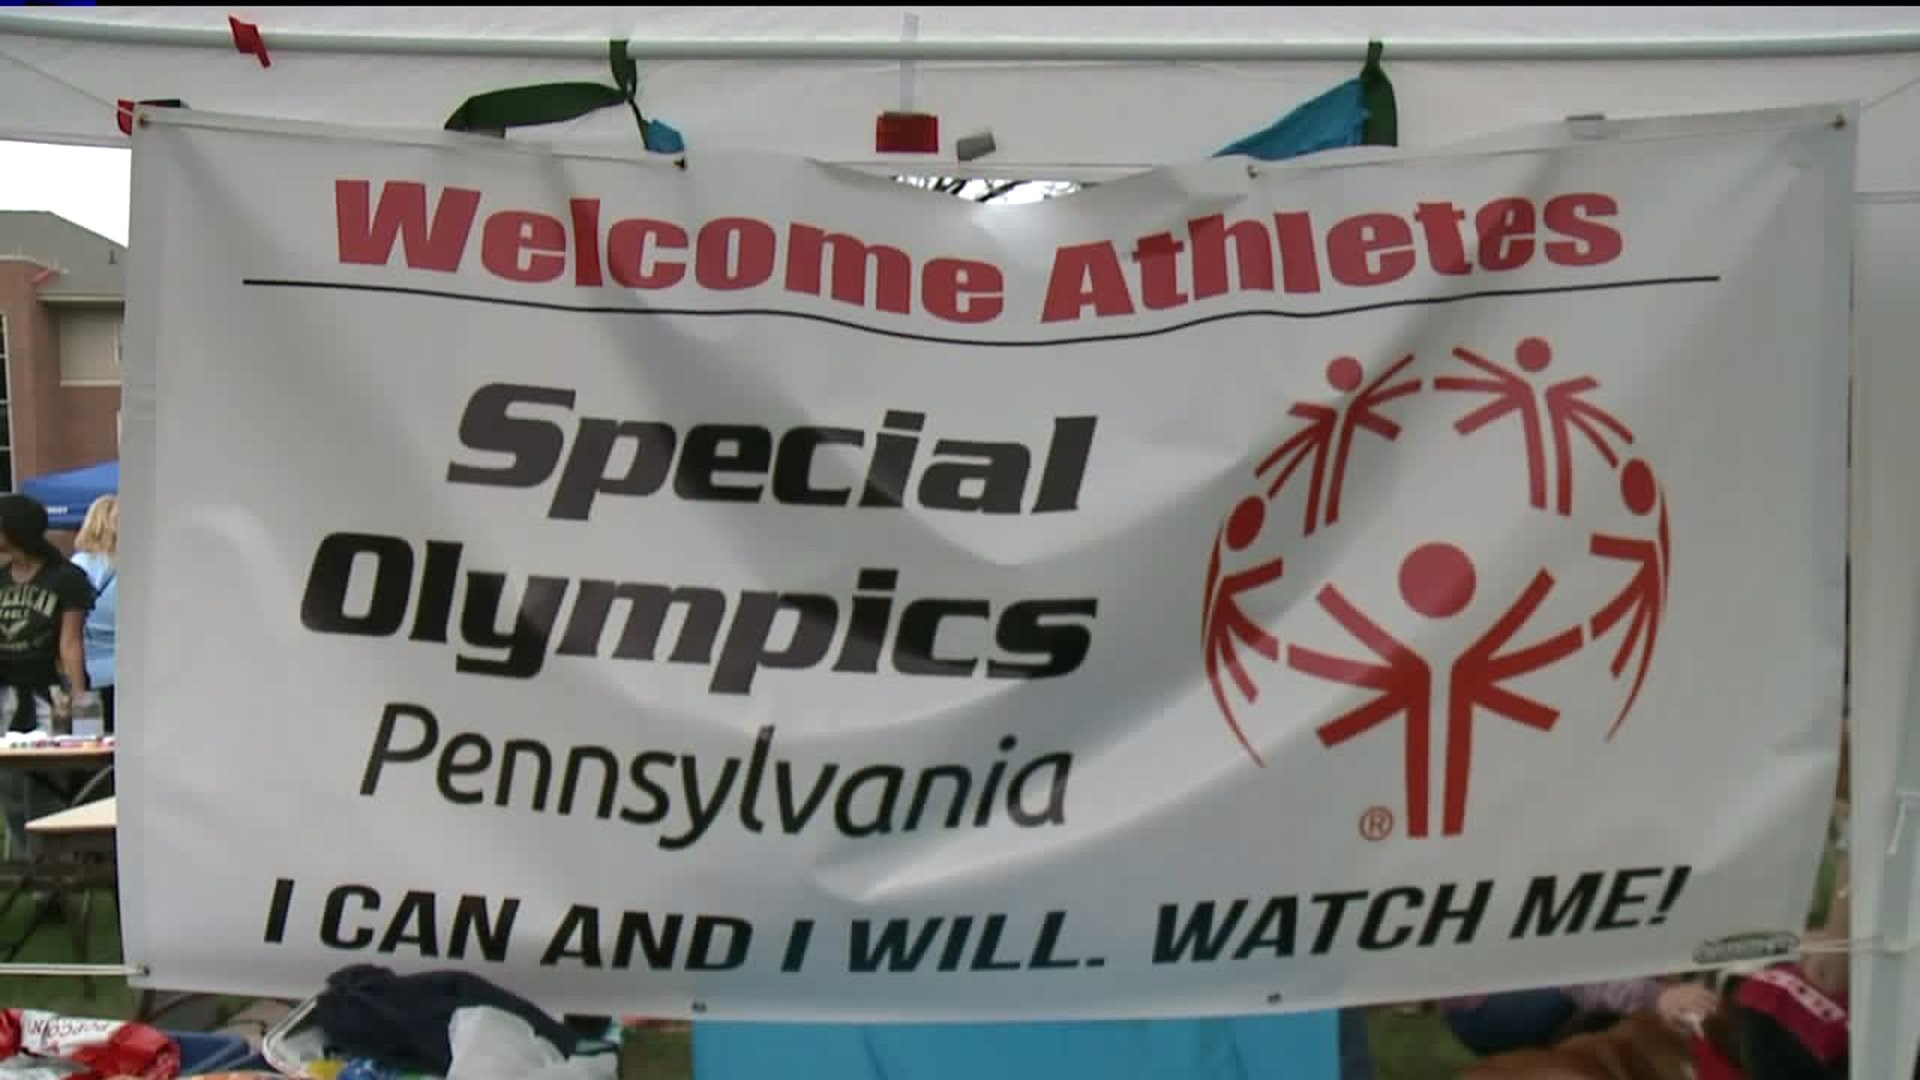 Reaction to Proposed Special Olympics Cuts